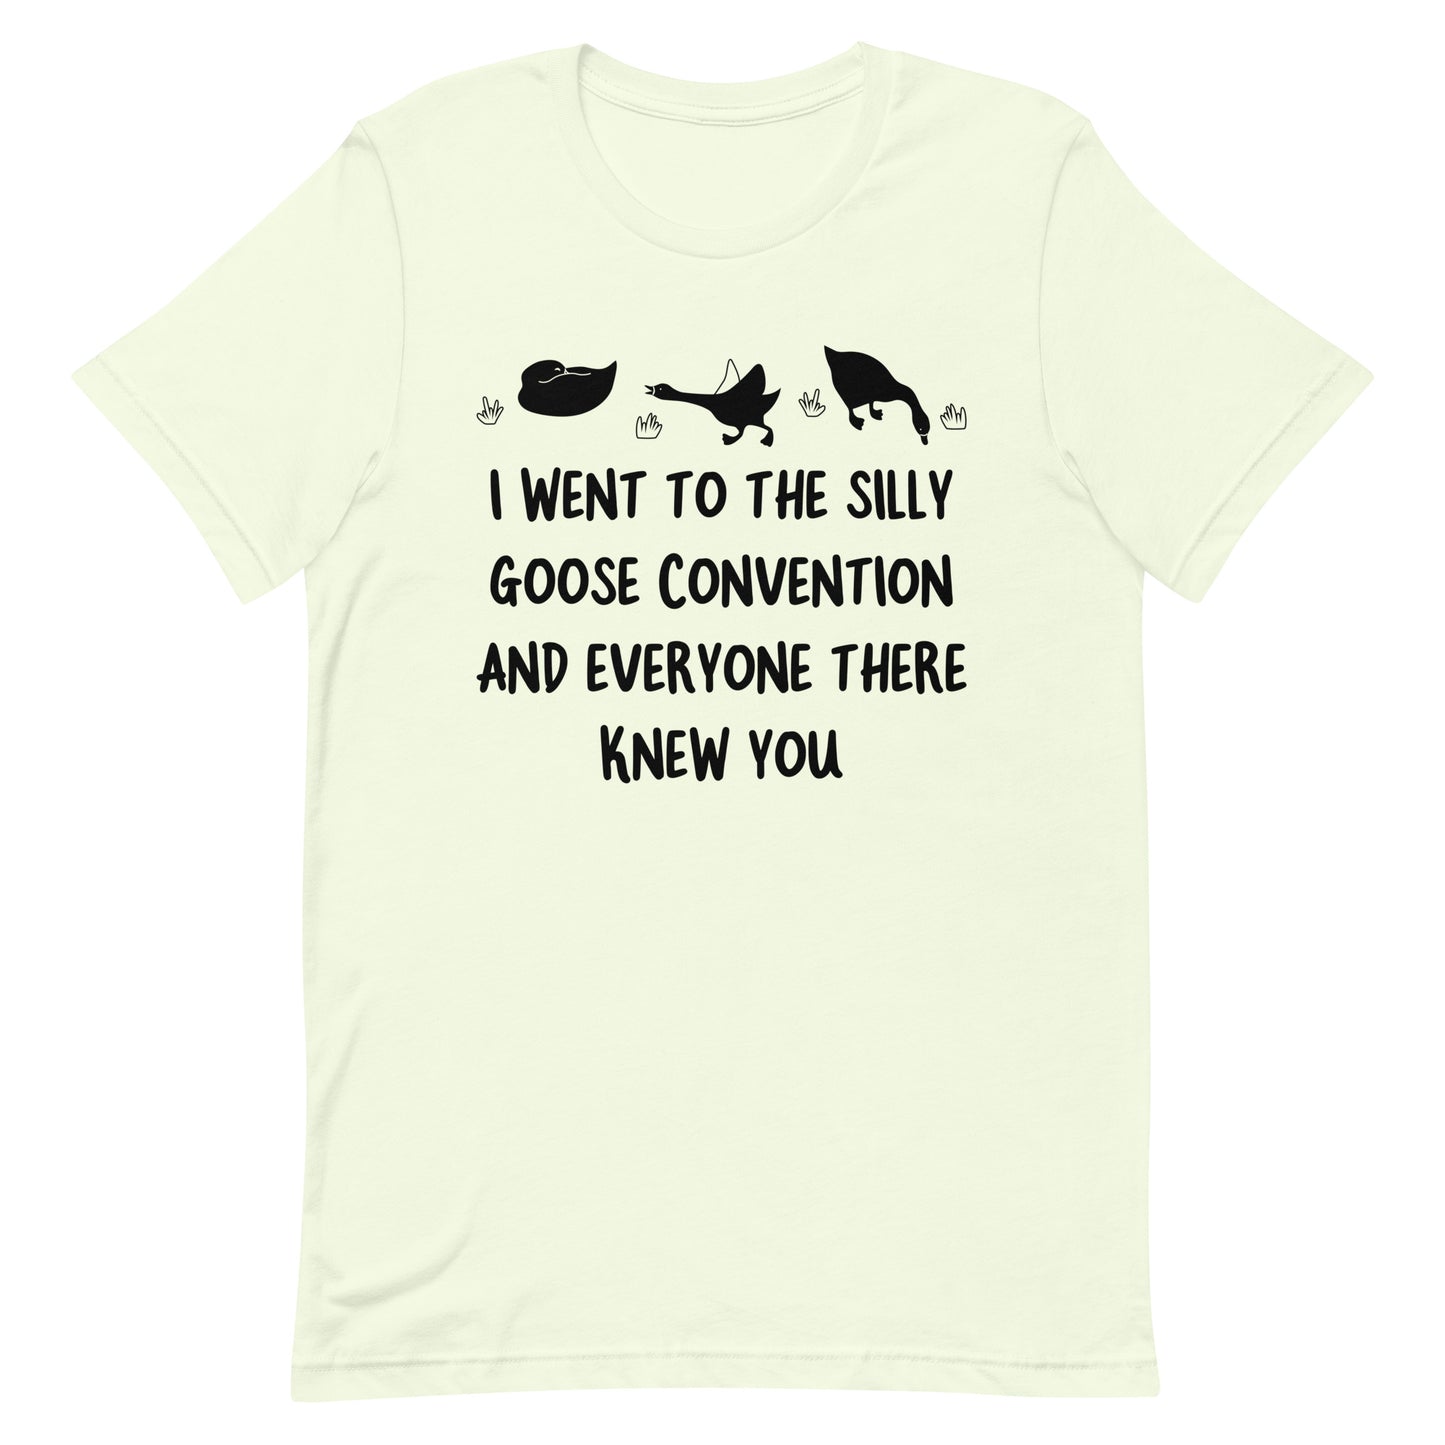 The Silly Goose Convention Unisex t-shirt